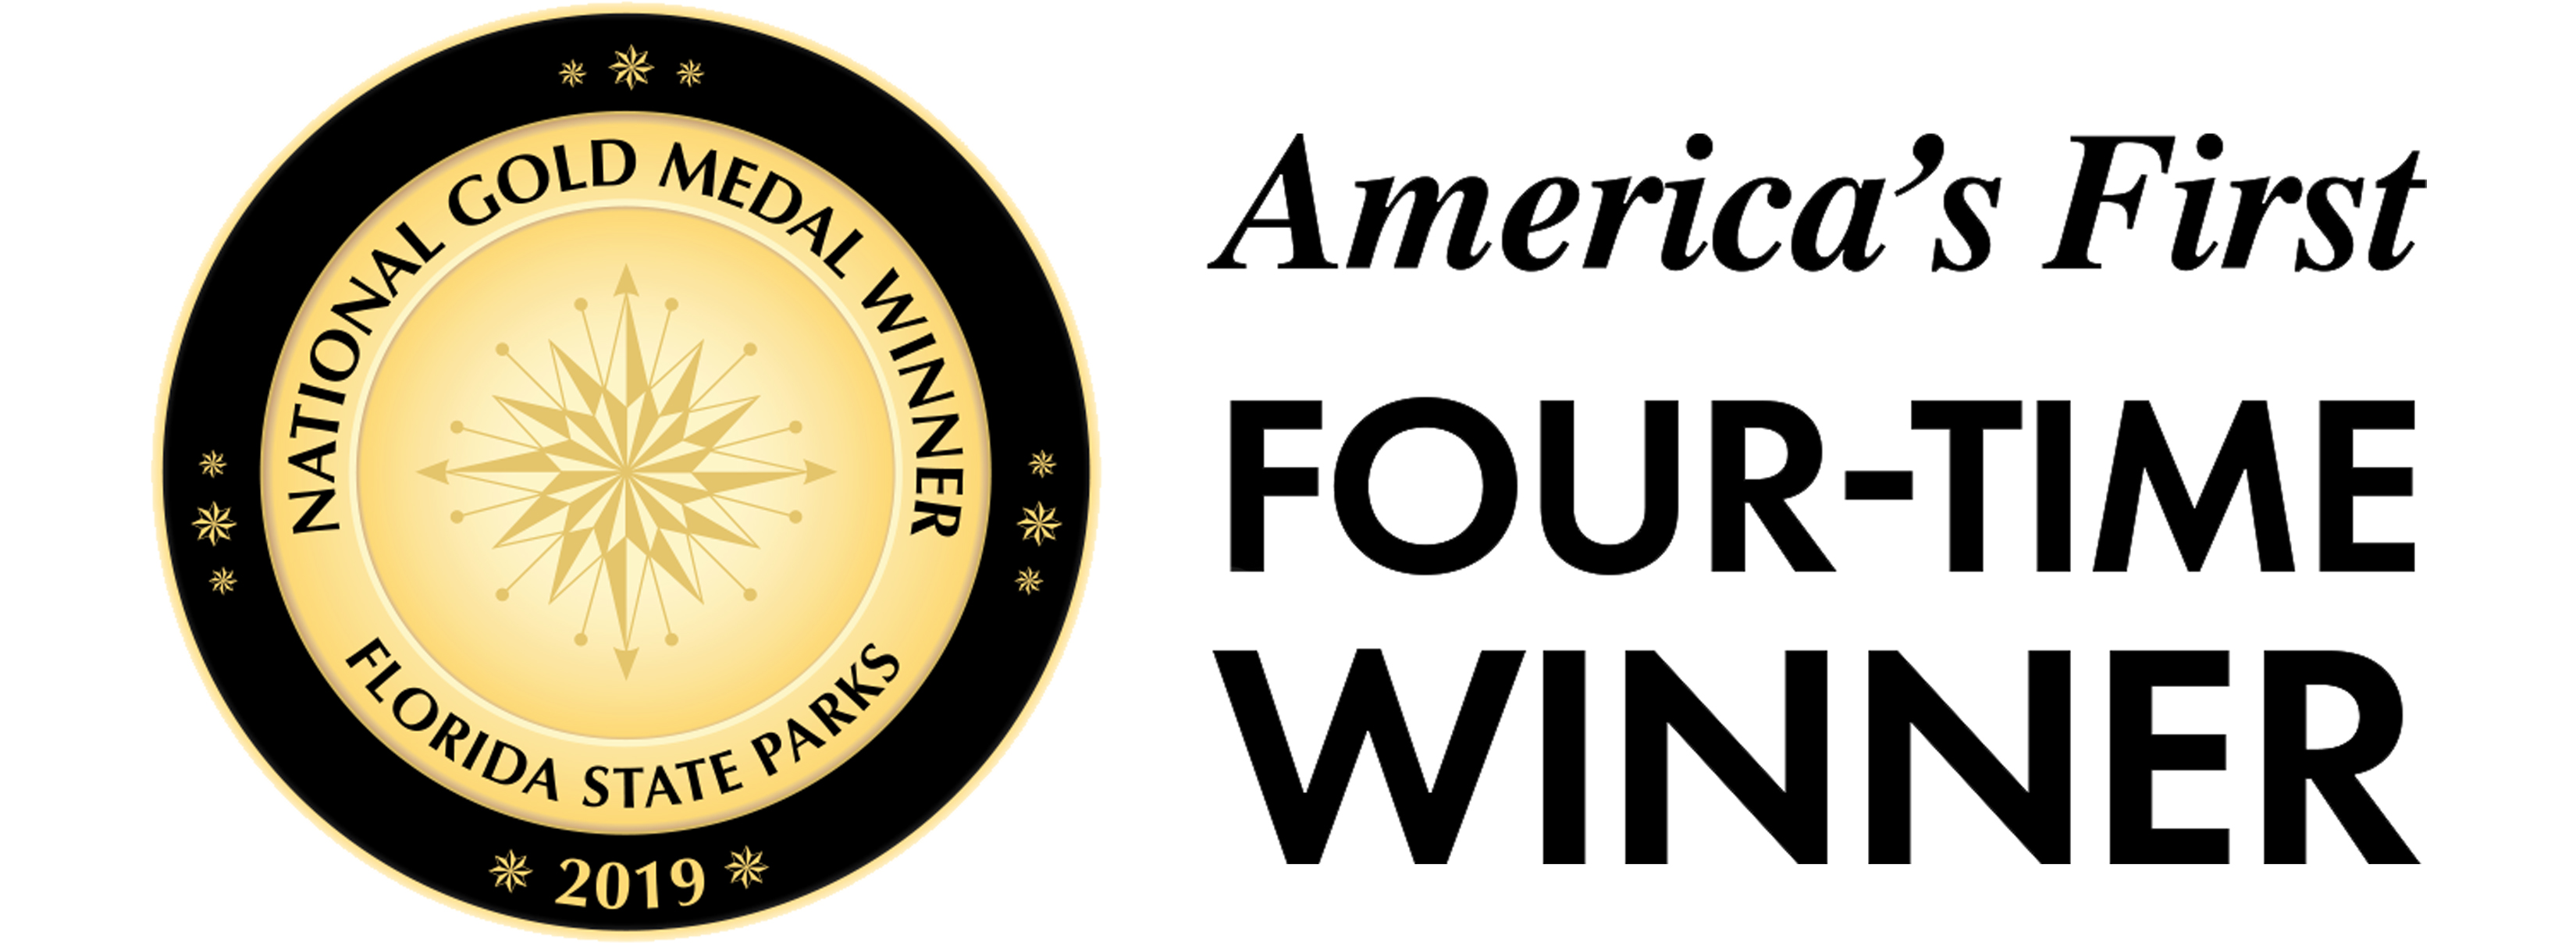 Gold Medal - America's First Four Time Winner